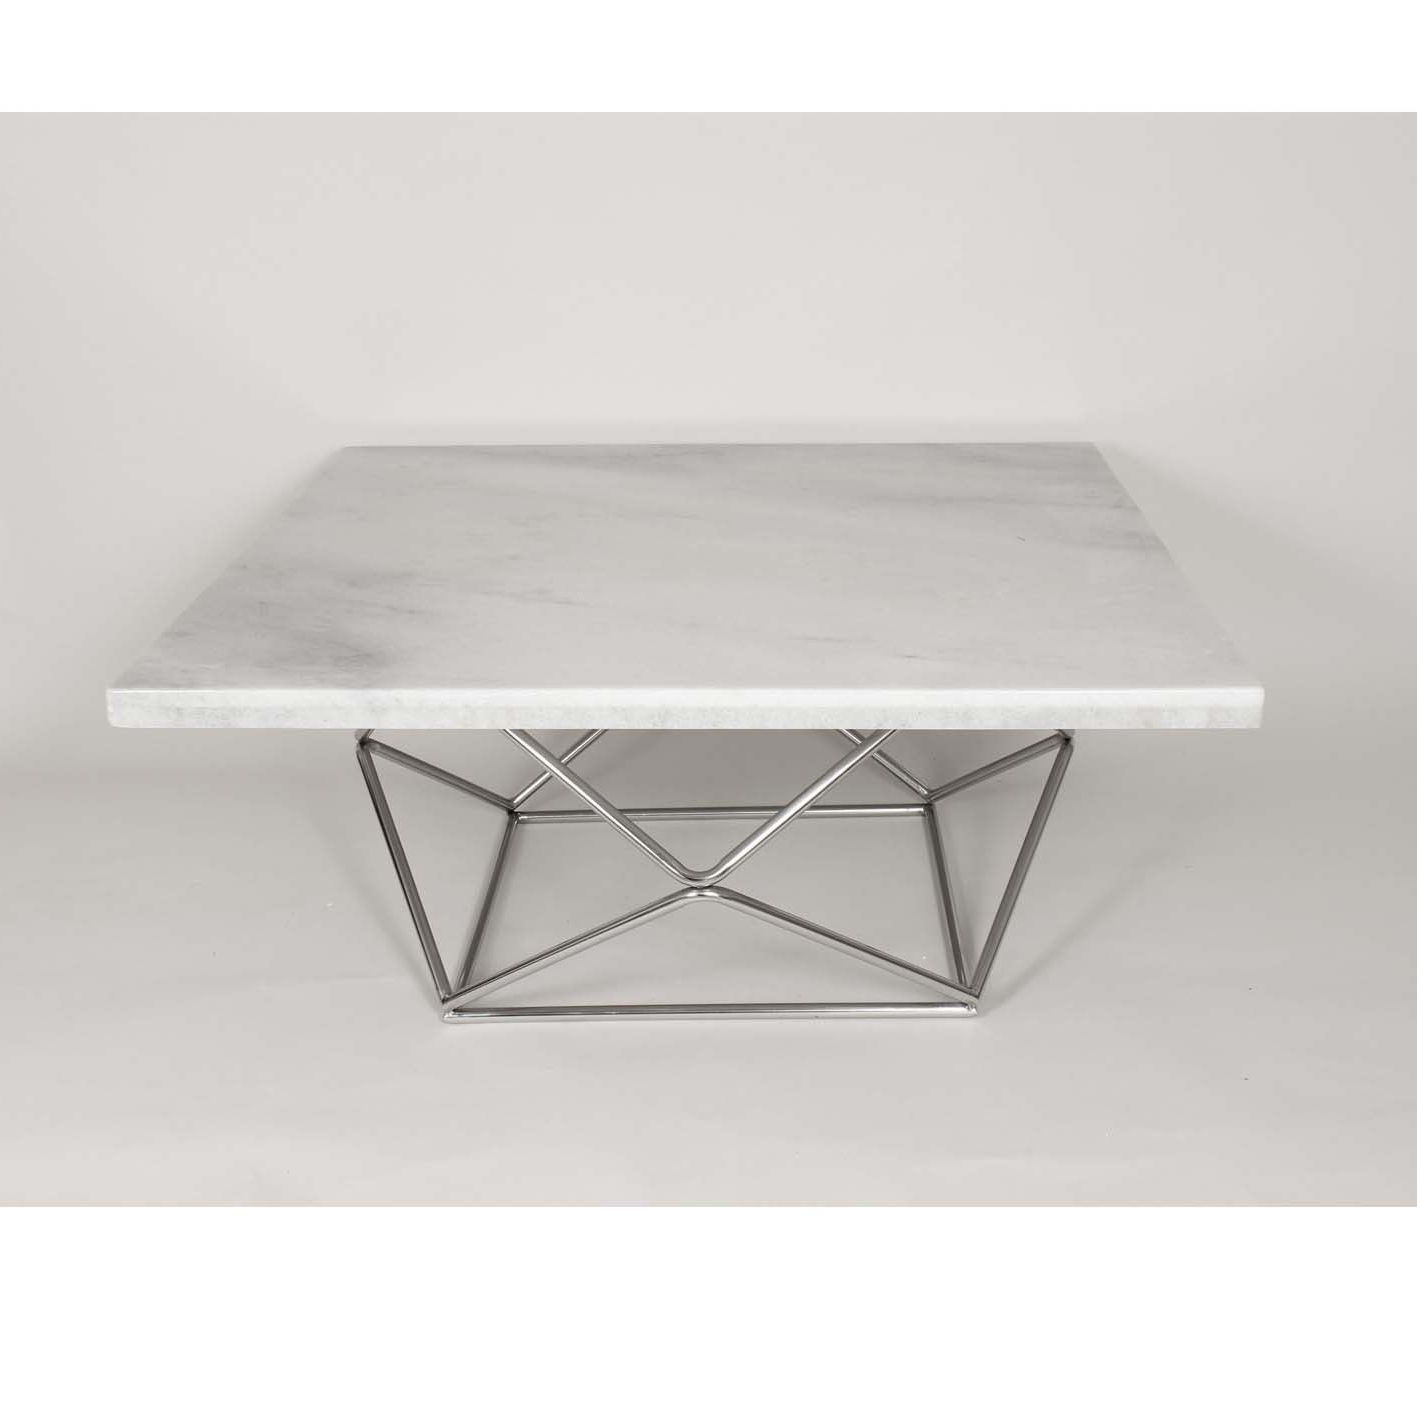 Geometric Coffee Table Pertaining To 2019 White Geometric Coffee Tables (Gallery 3 of 20)